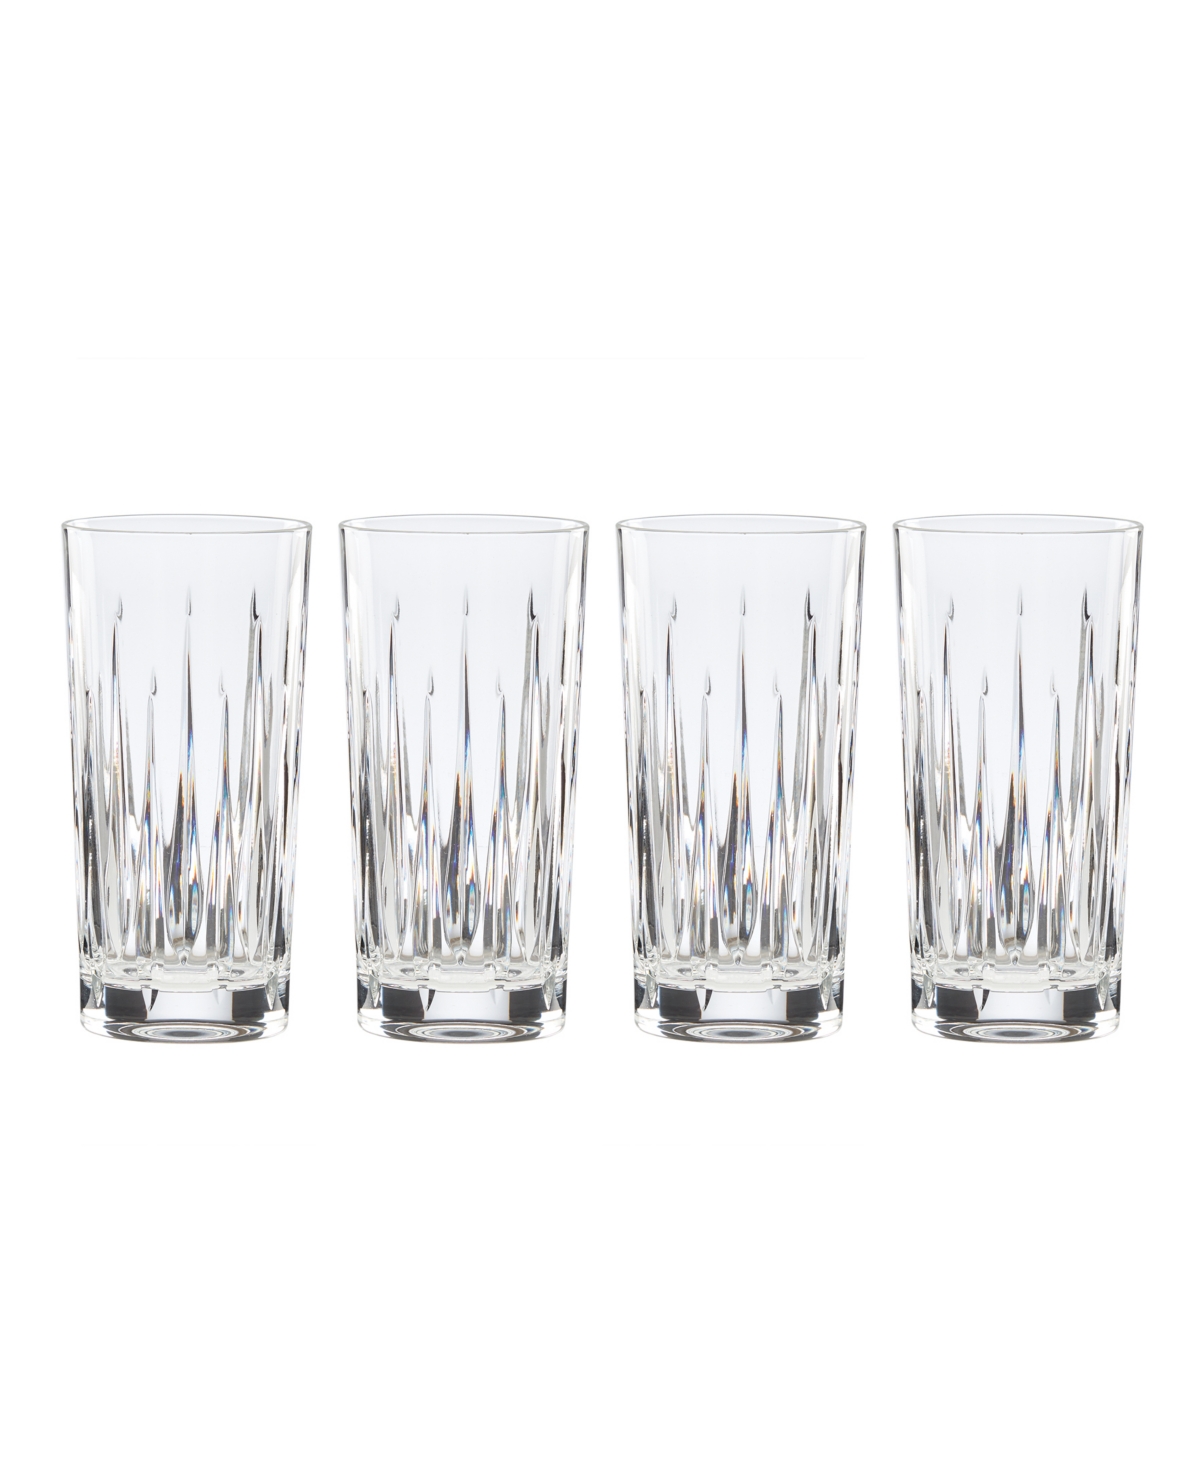 Reed & Barton Soho Hiball Glasses Set, 4 Pieces In Clear And No Color